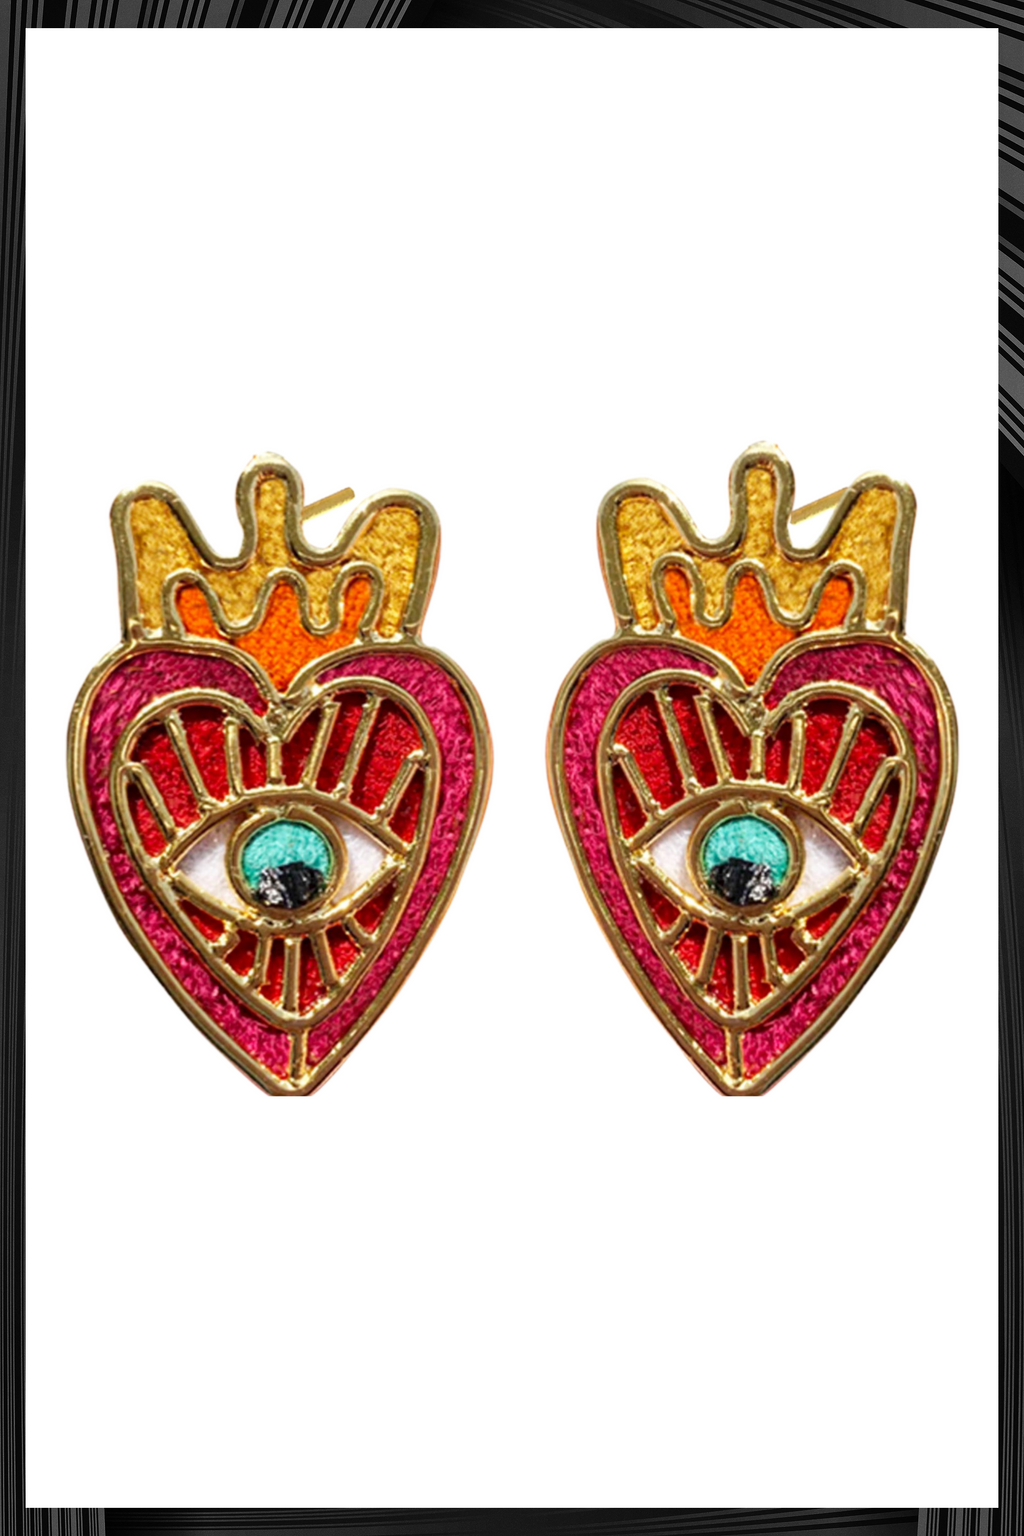 Milagros Del Corazon Studs | Free Delivery - 3 Week Shipping